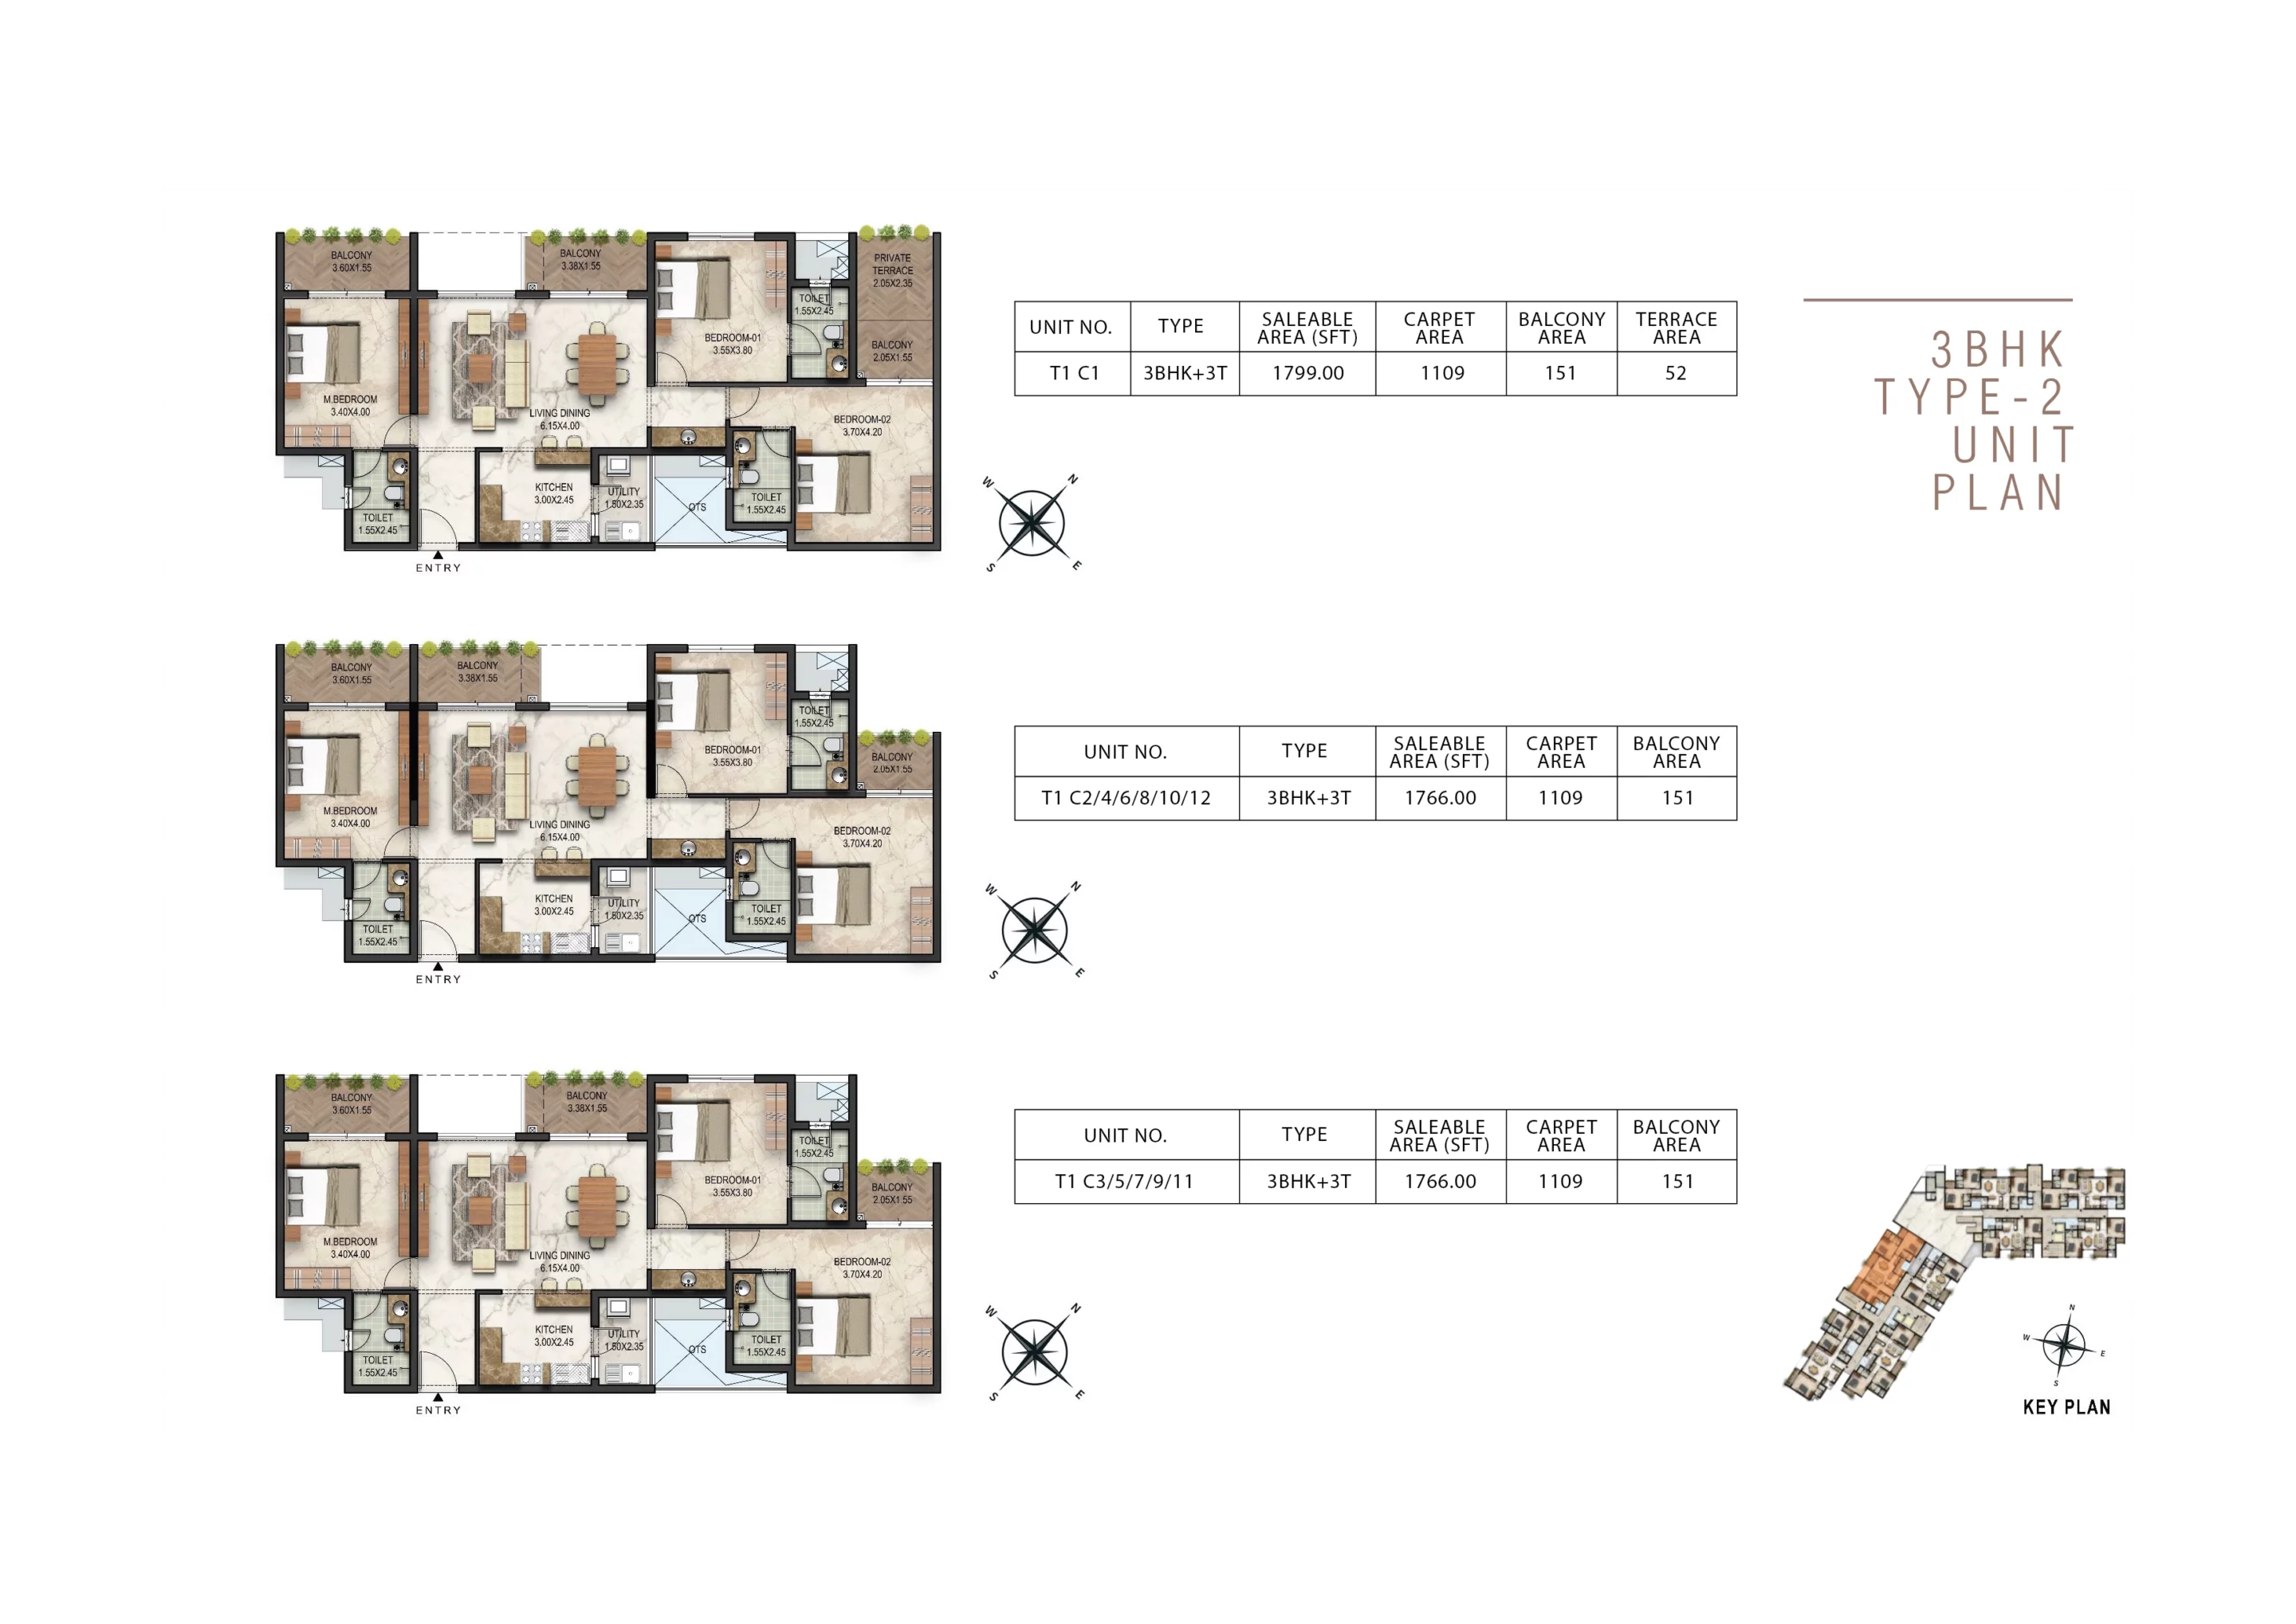 3 bhk type-2 unit plan with 3 toilets luxury apartment floor plan starting at 1700sqft in tower 1 with balcony area and terrace area in akkulam trivandrum